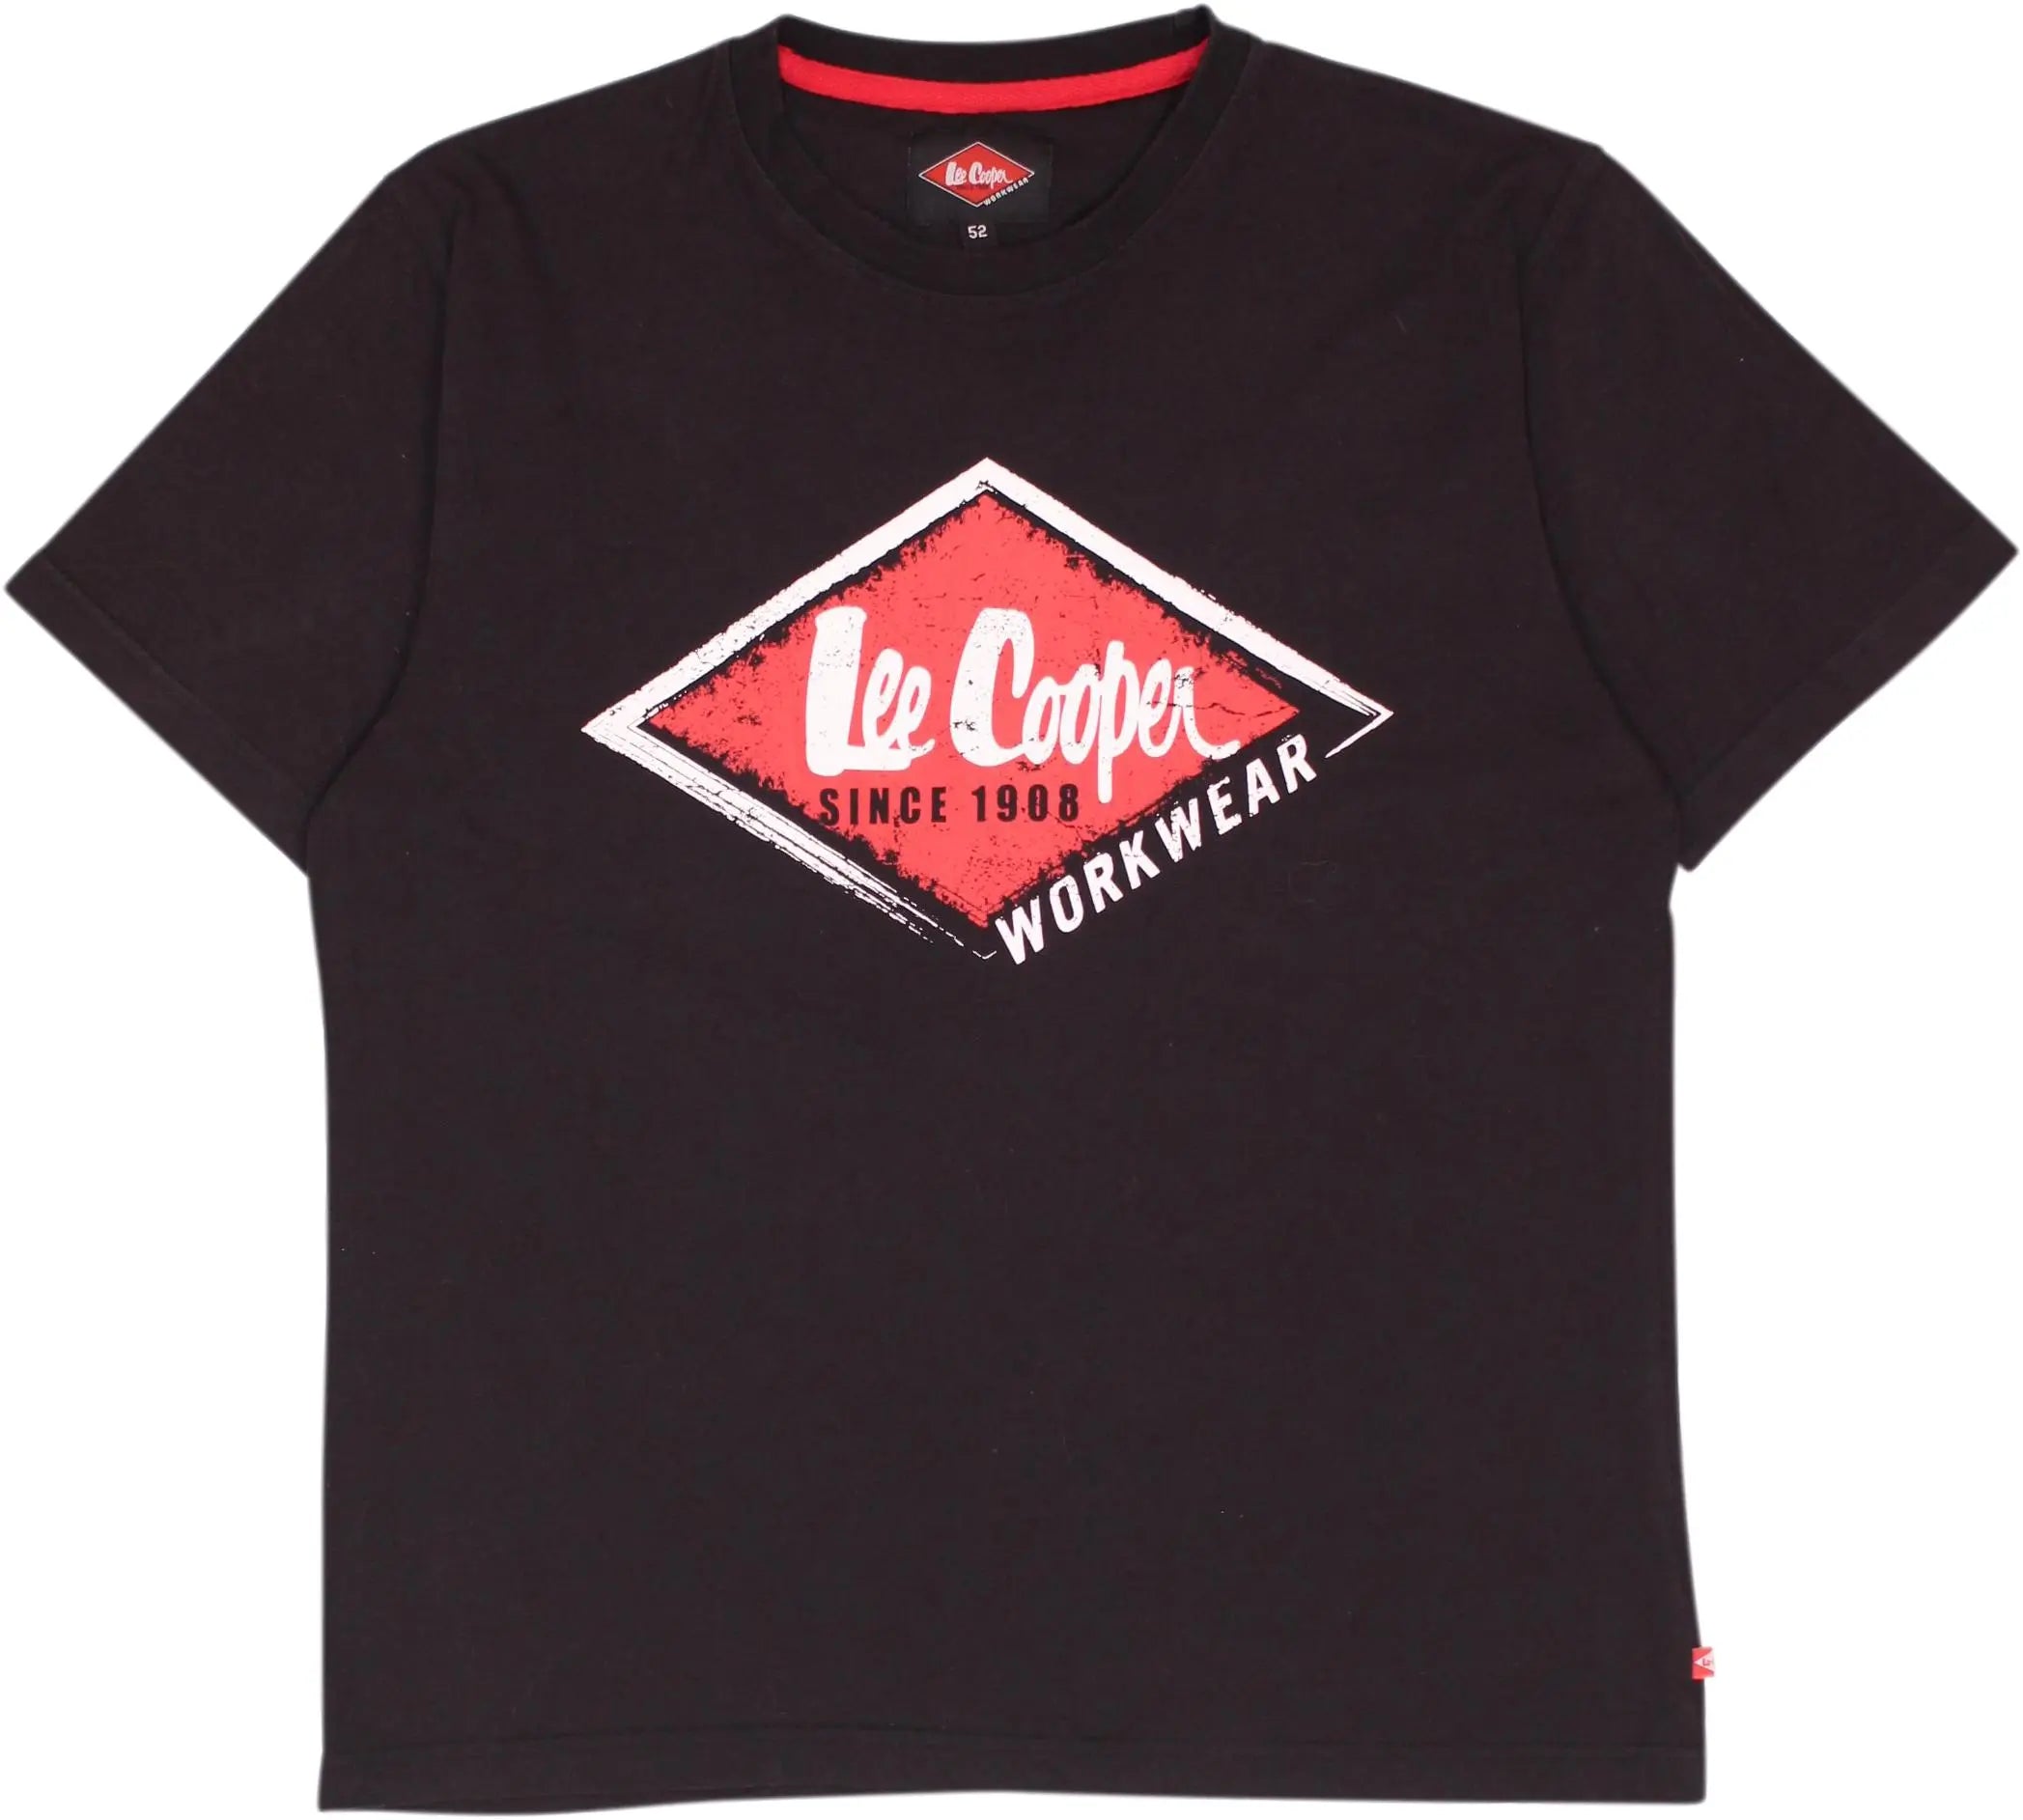 Lee Cooper - Black T-shirt by Lee Cooper- ThriftTale.com - Vintage and second handclothing